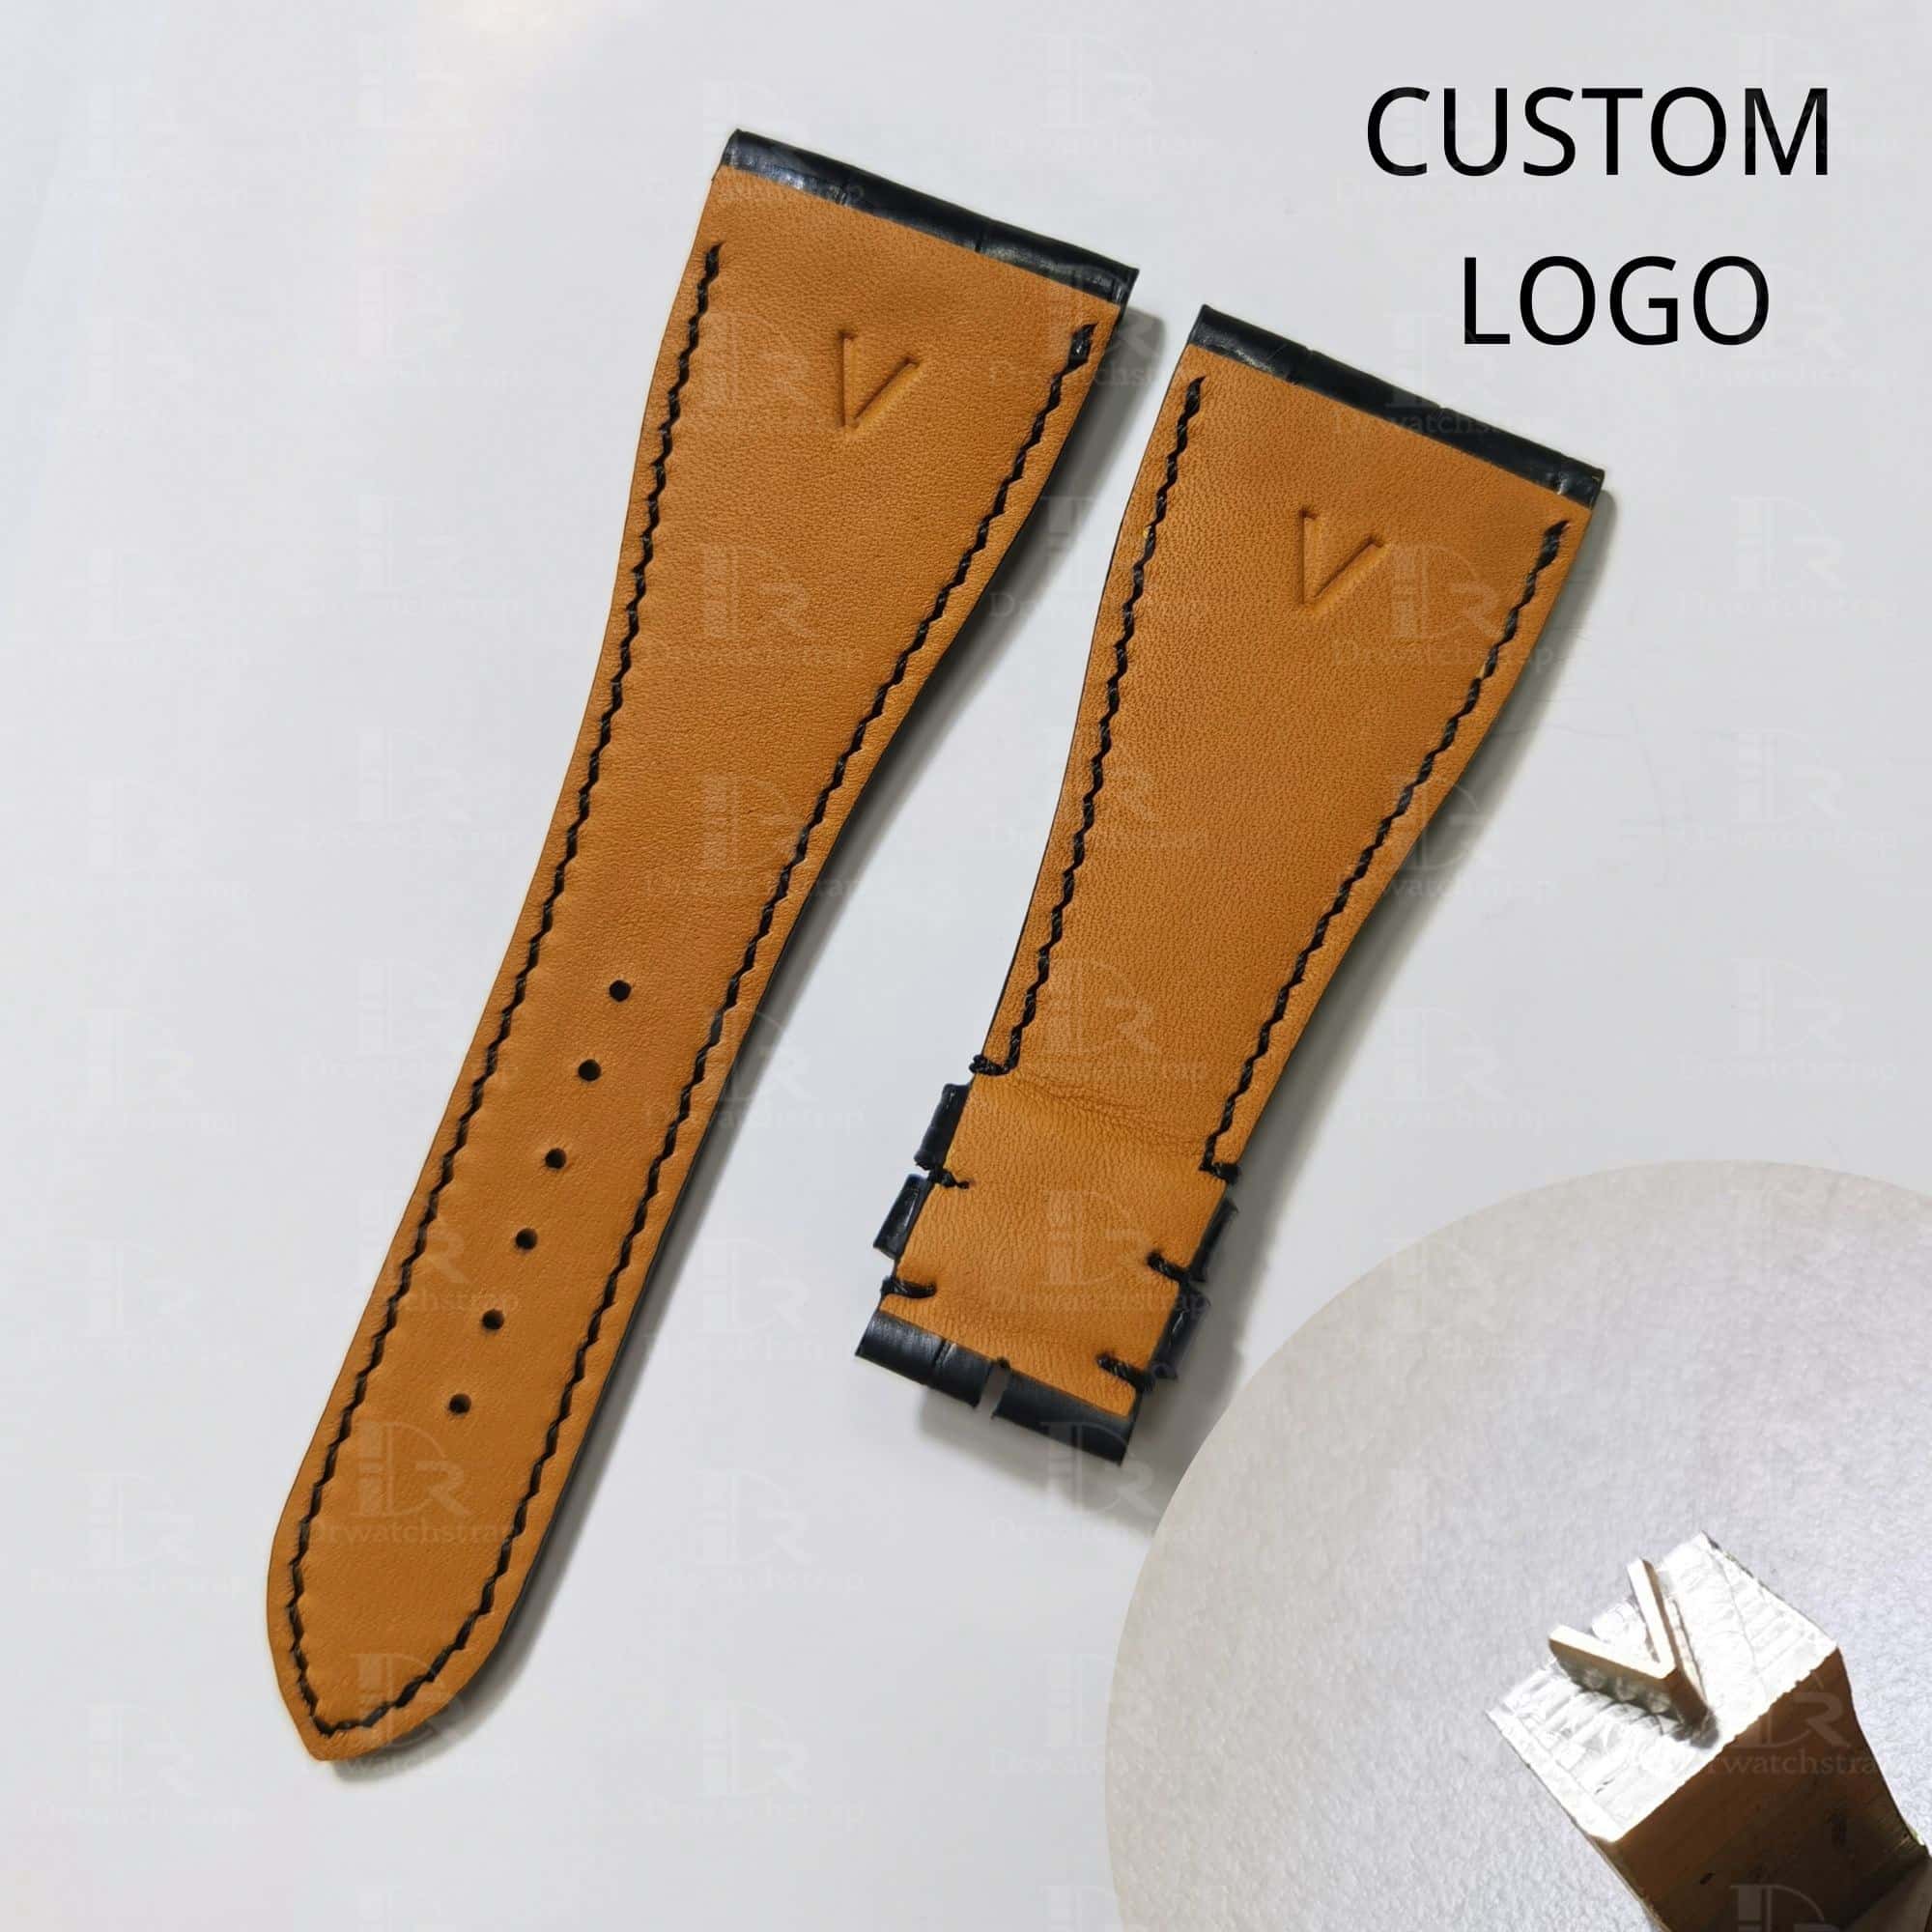 Custom logo engraved personalized leather watch band strap (1)